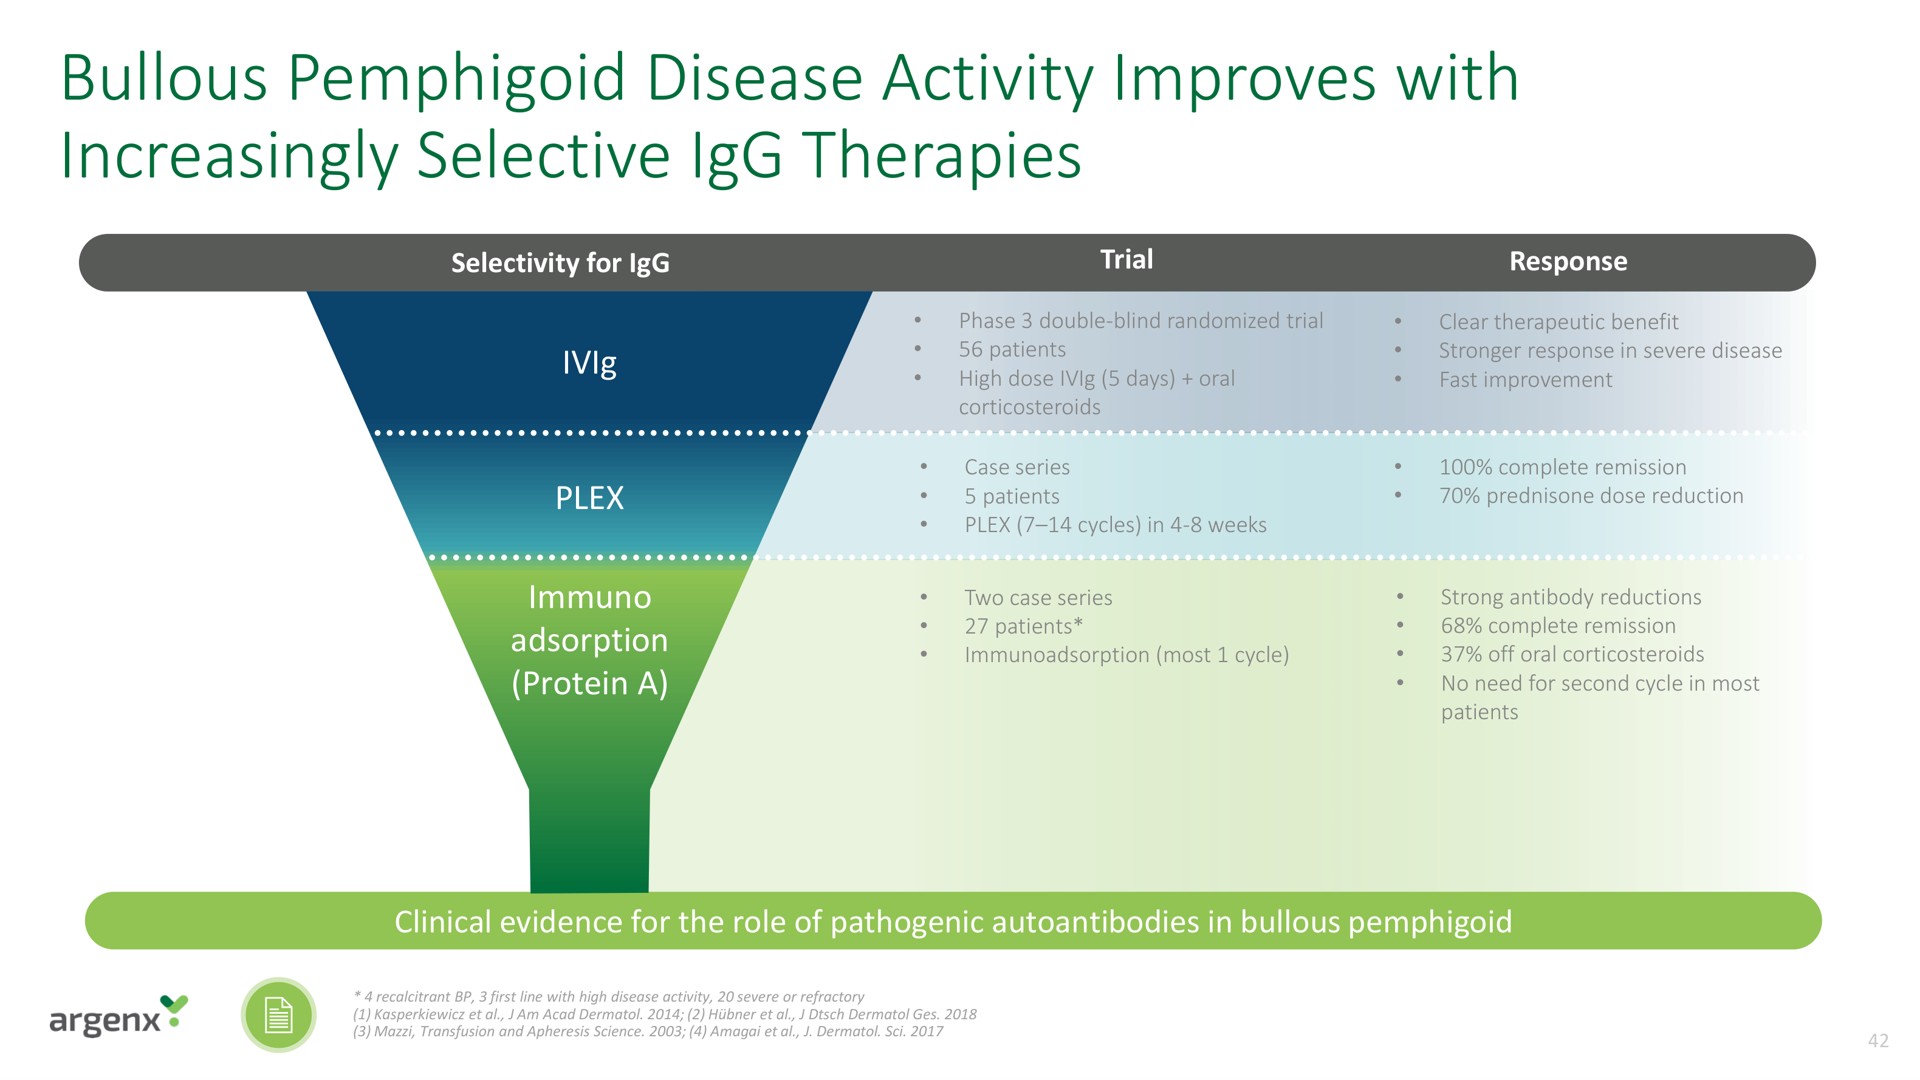 bullous pemphigoid disease activity improves with increasingly selective therapies | argenx SE